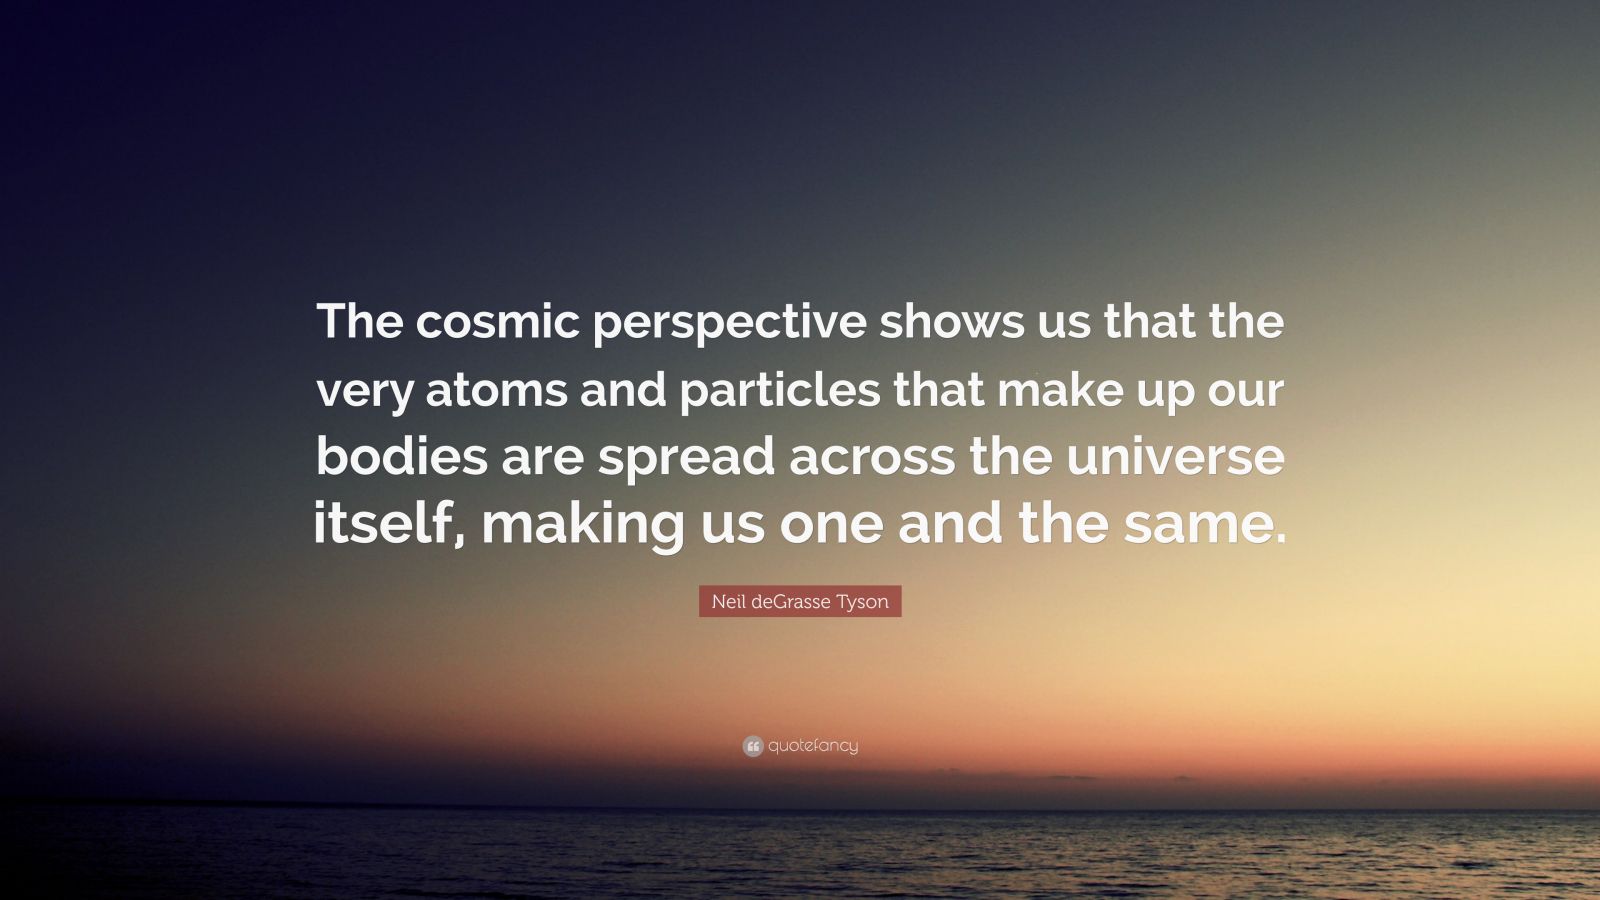 Neil Degrasse Tyson Quote “the Cosmic Perspective Shows Us That The Very Atoms And Particles 2599